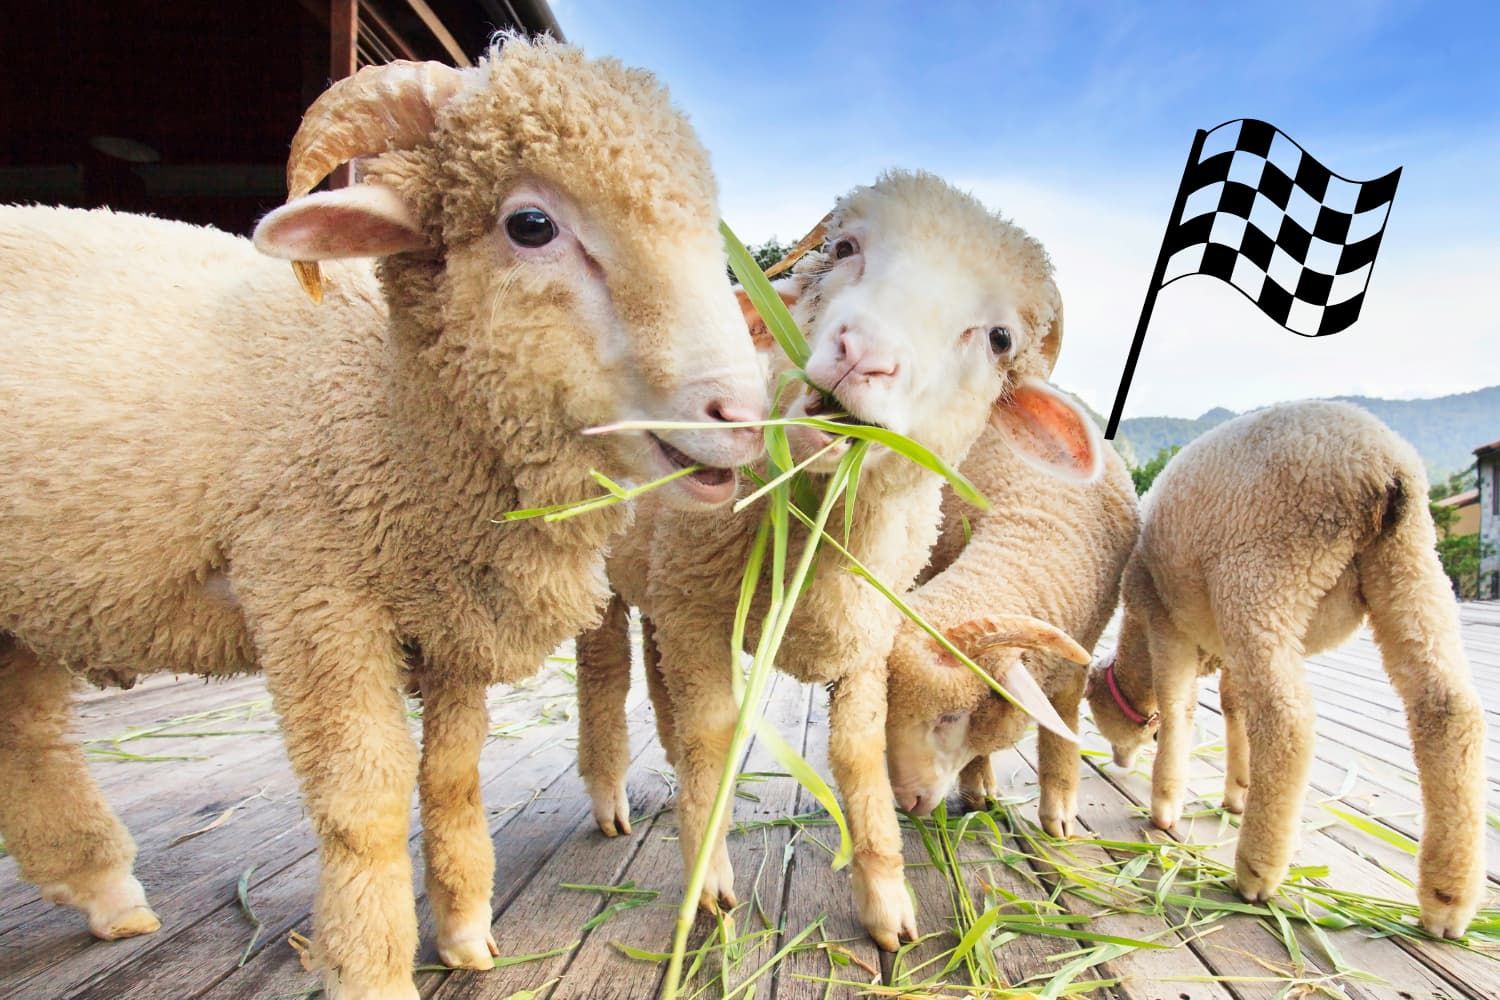 Game%20-%20OT%20Psalm%2023%20-%20The%20feed%20the%20sheep%20relay%20race-6bb58723 Games